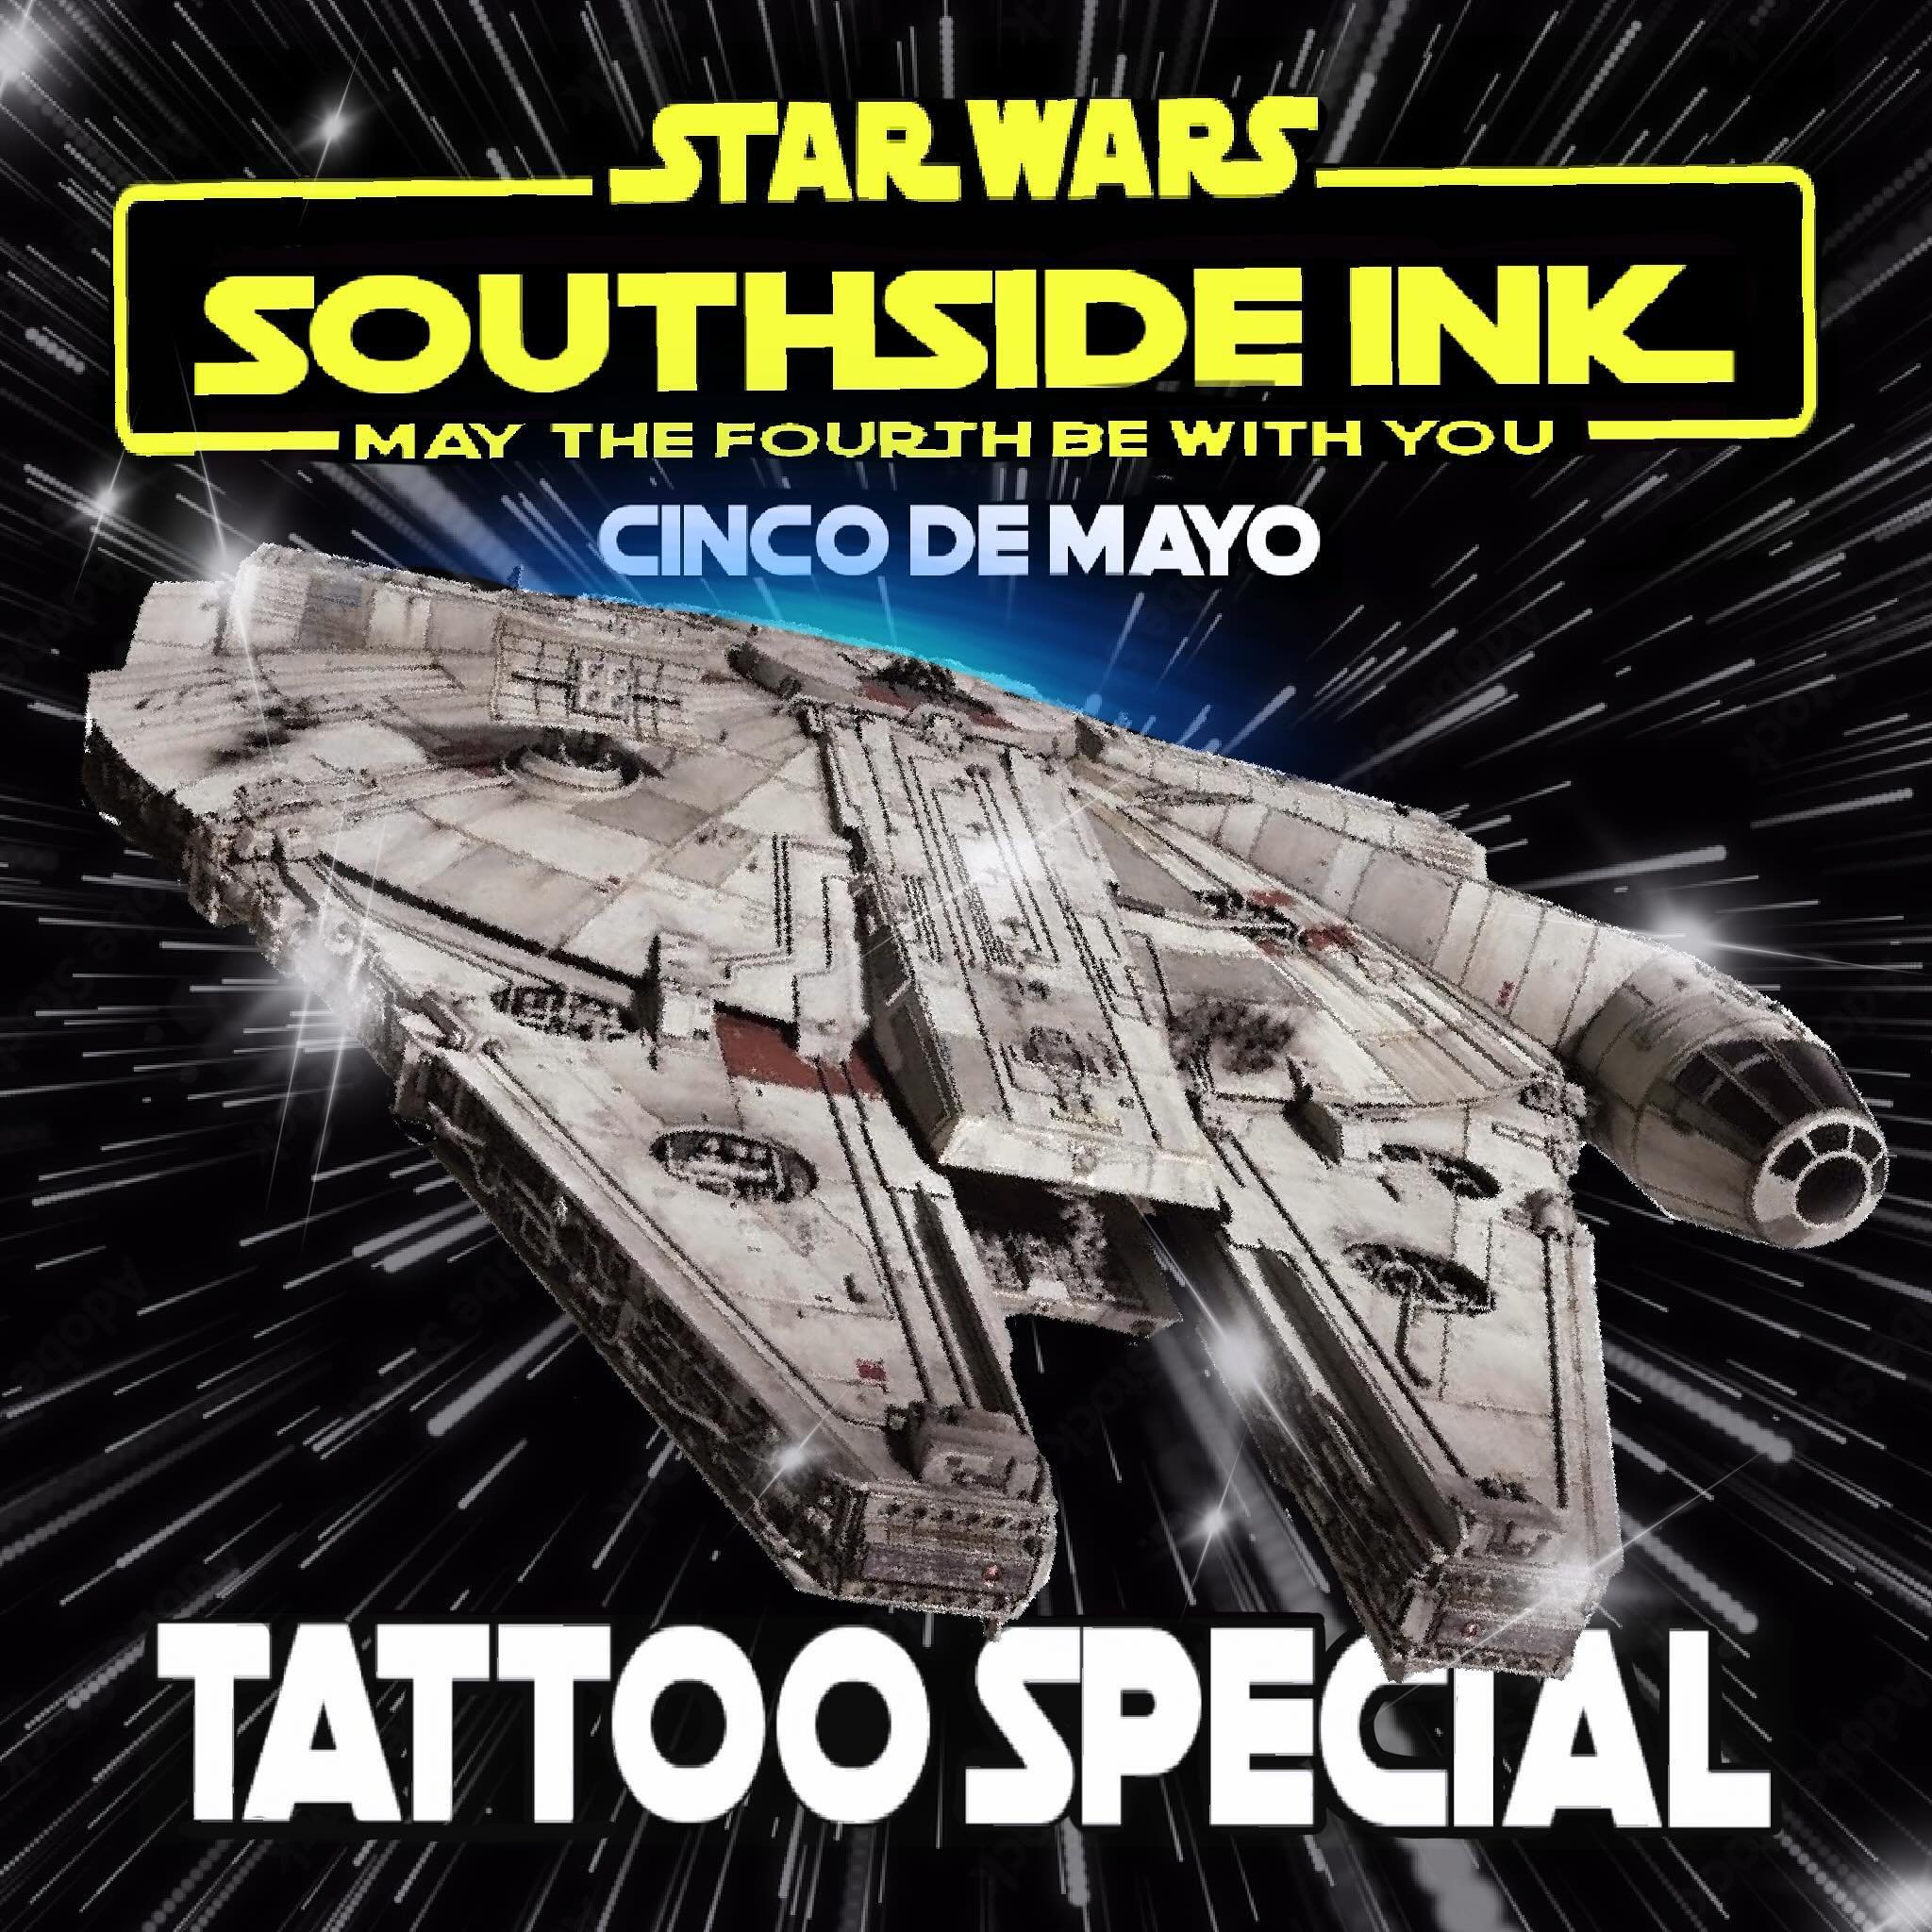 Feel the force with a shot of tequila!
May 4 &amp; 5, any STAR WARS / MEXICAN related imageries starting at $100.00 Have fun with your tattoos.

#tattoo #tattoos #tattooed #tattooartist #tattooart #tattoolife #tattooed girls #instatattoo #tattooing #